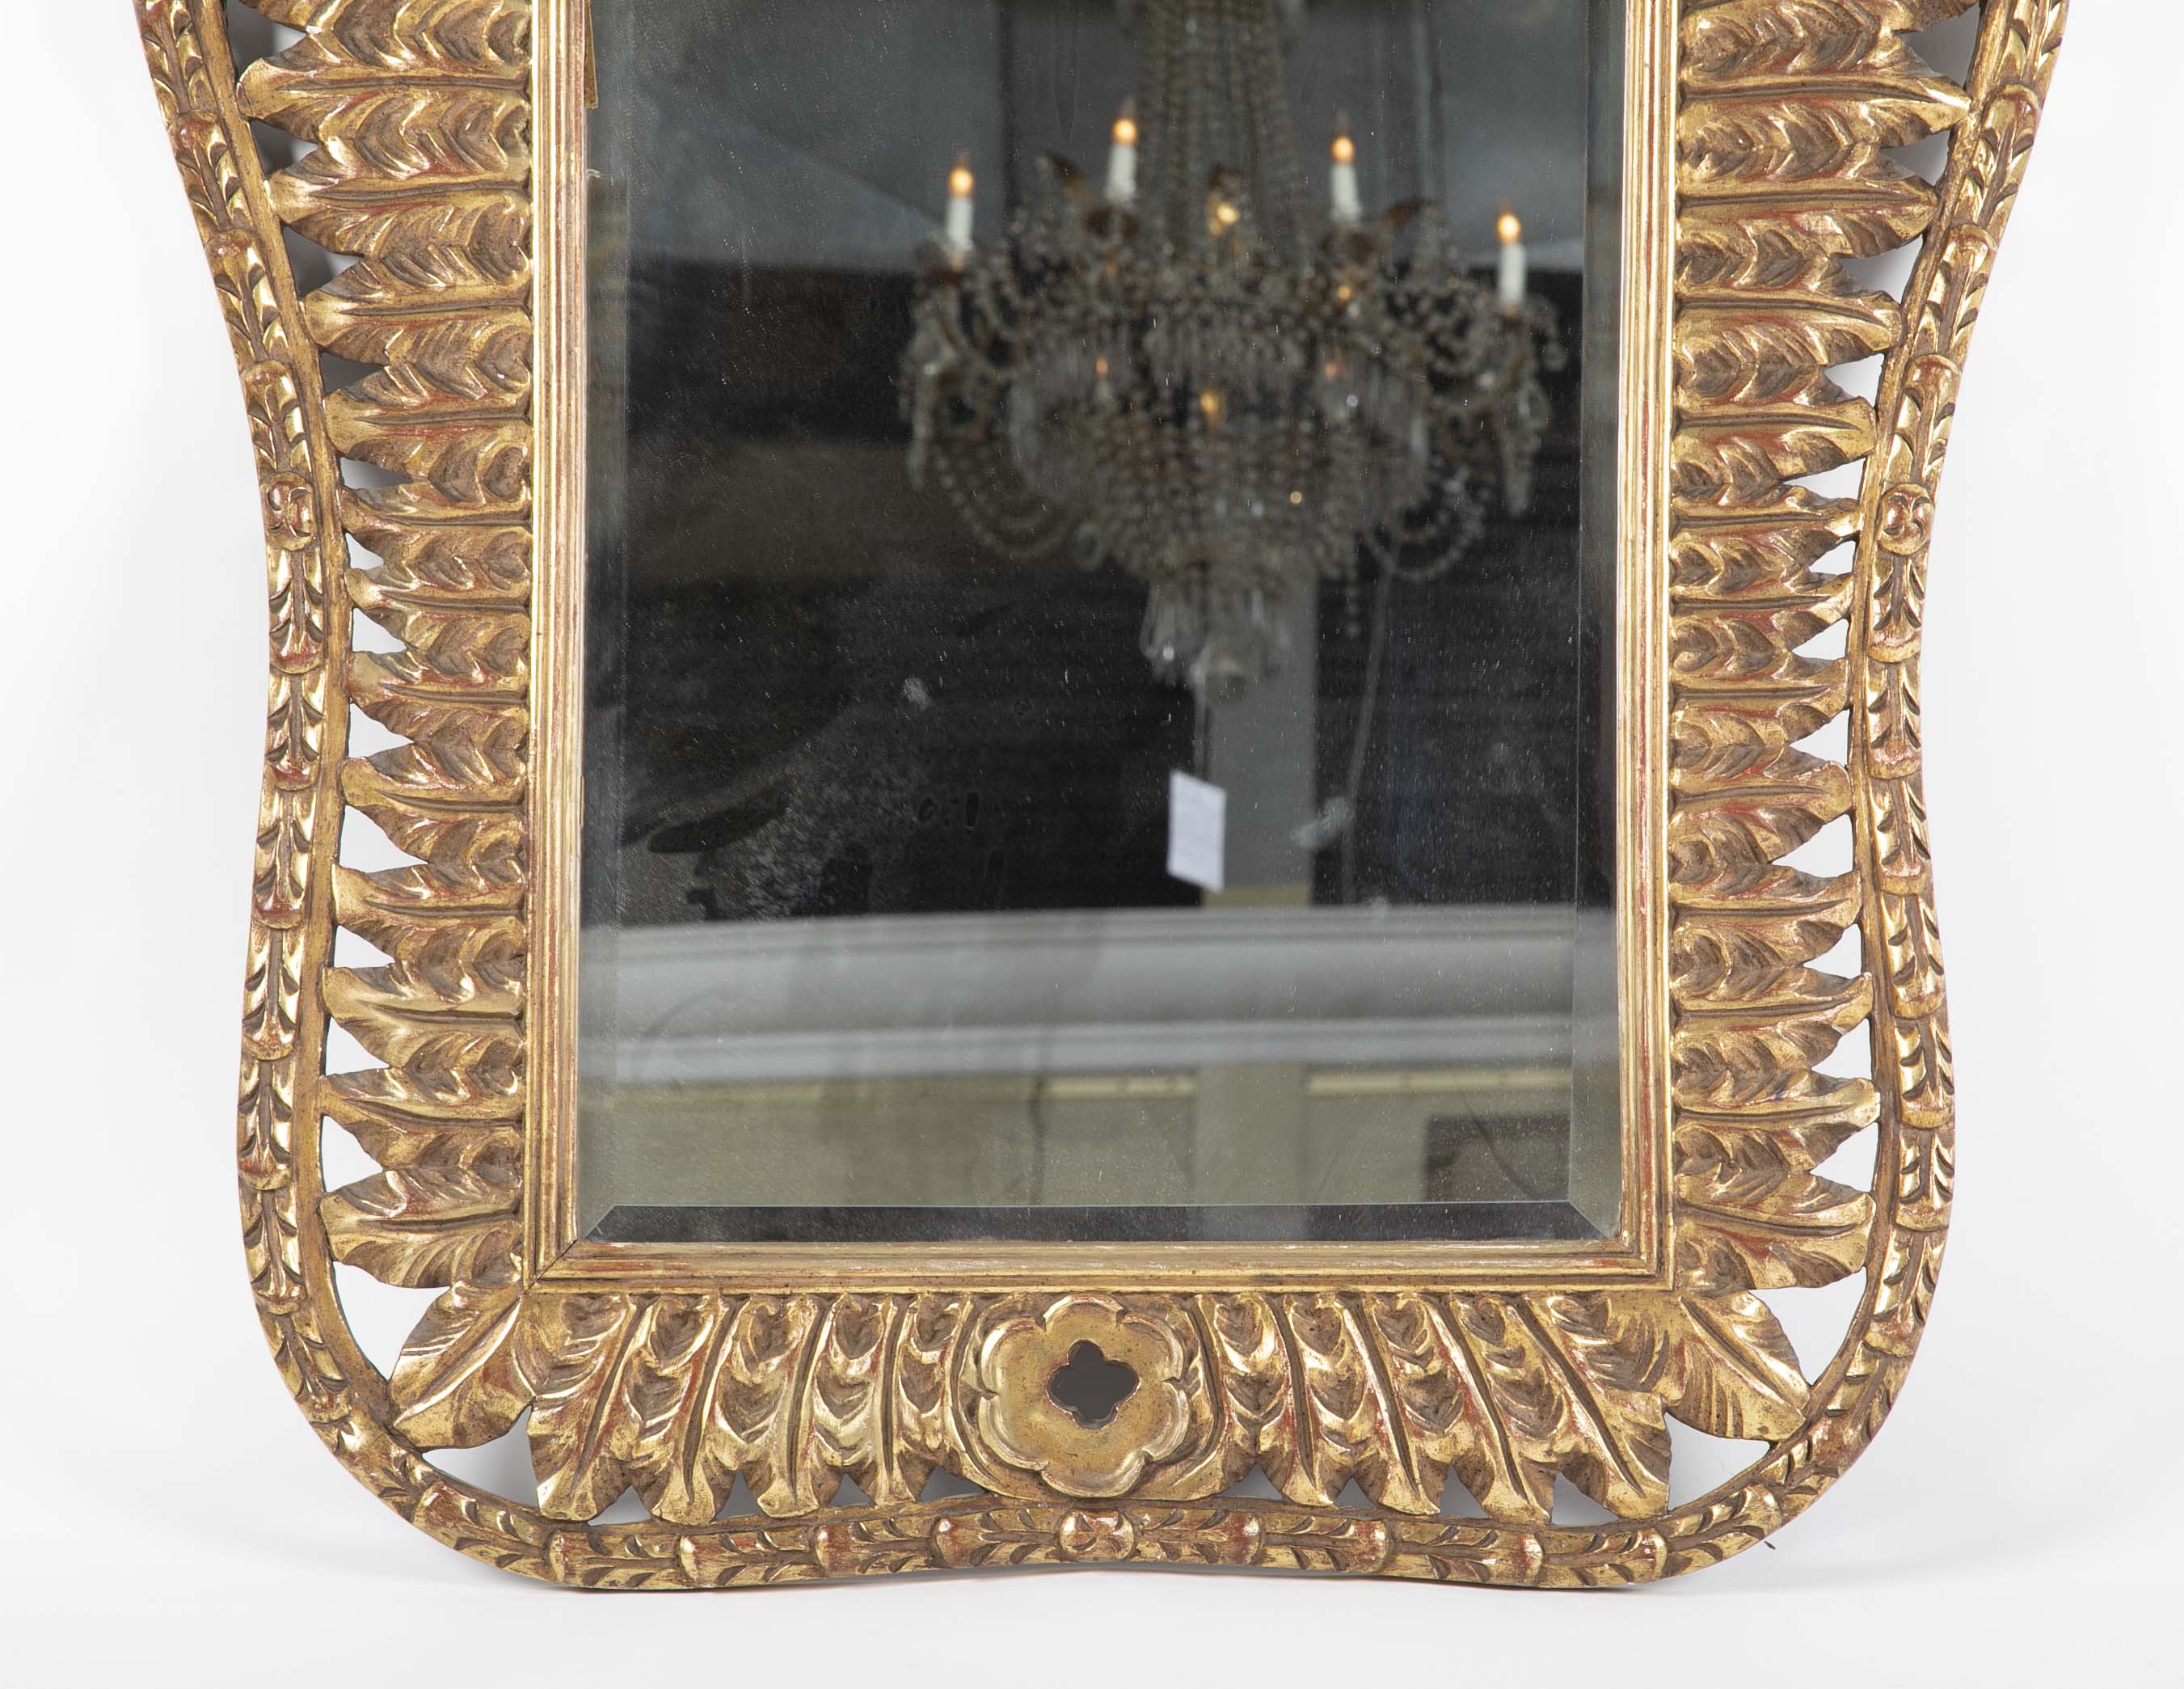 Signed Jansen Carved Gilt Feather Fantasy Mirror